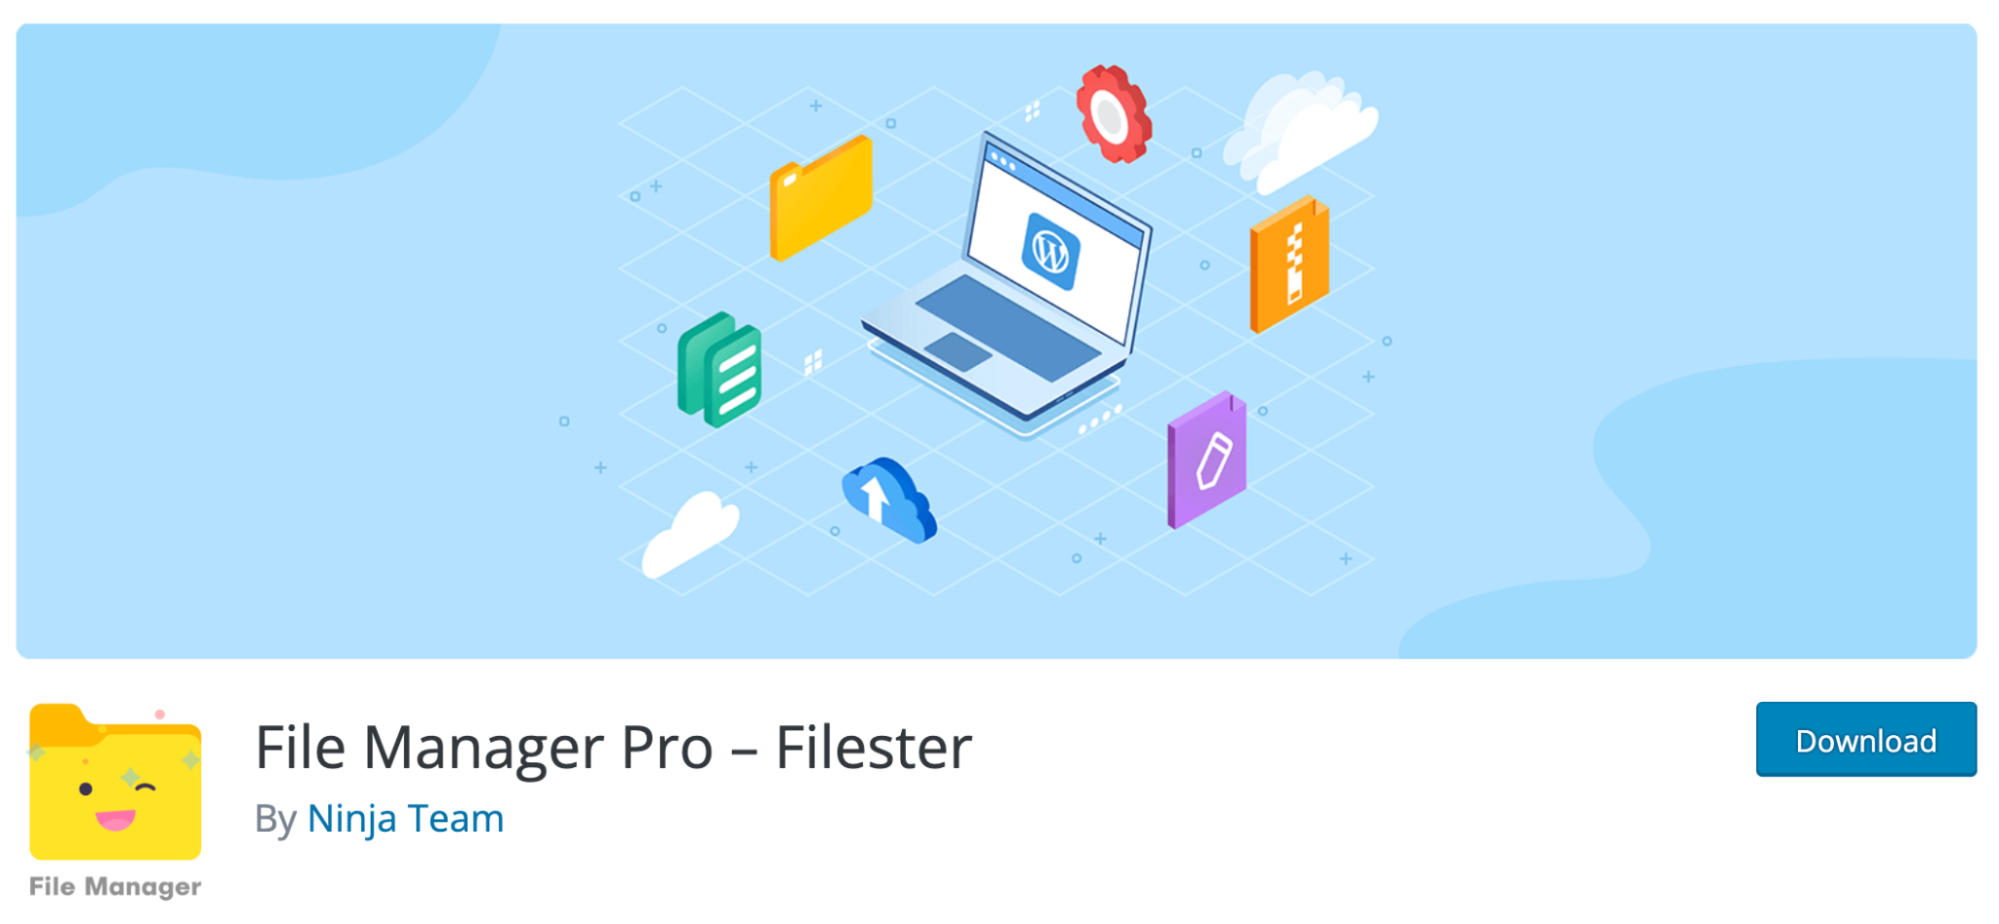 10 Filester File Manager Pro